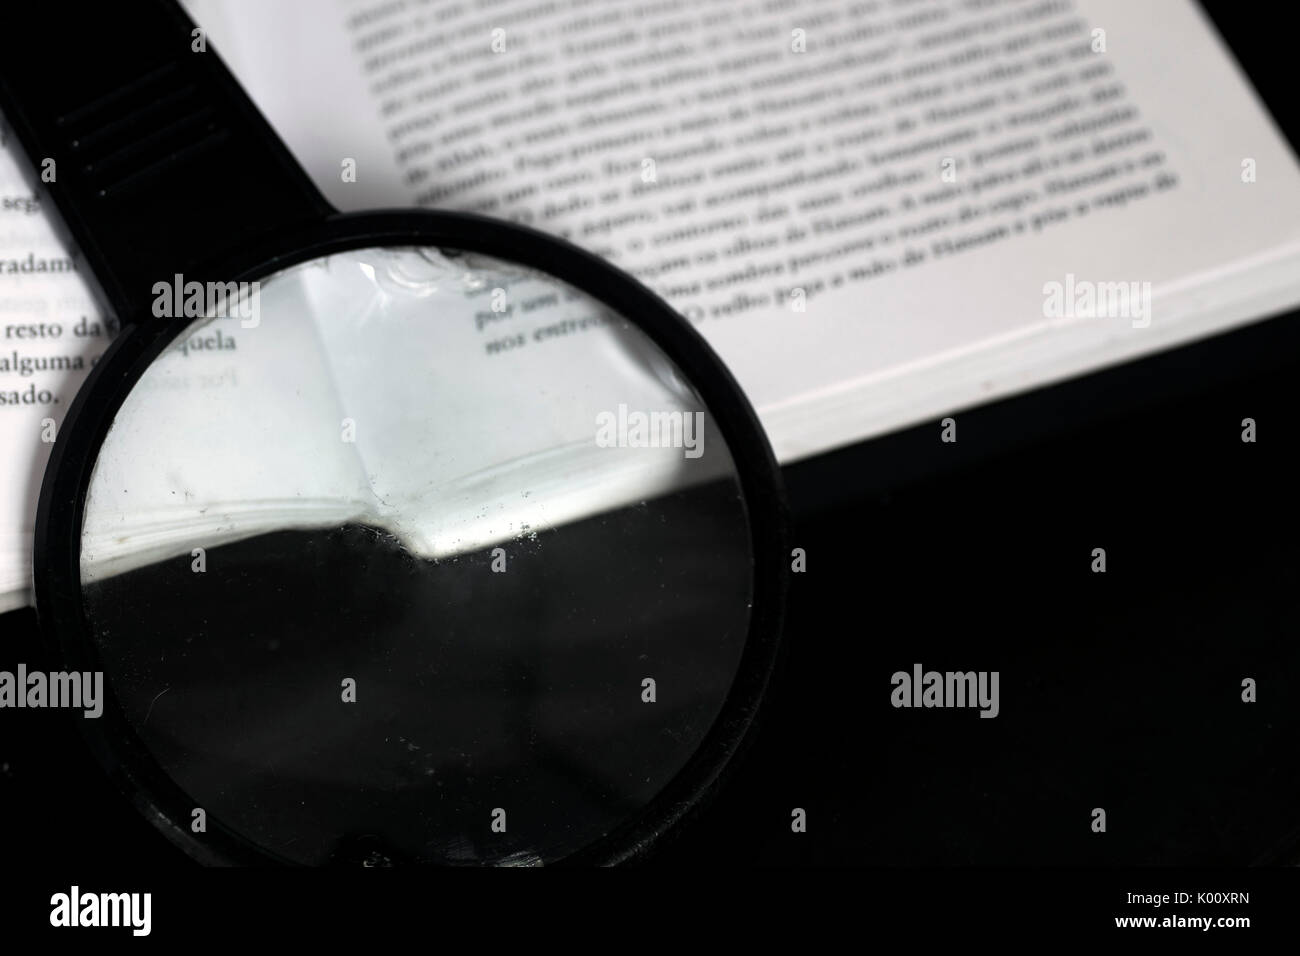 Magnifying glass on top of an open book on top of a black reflective glass surface Stock Photo